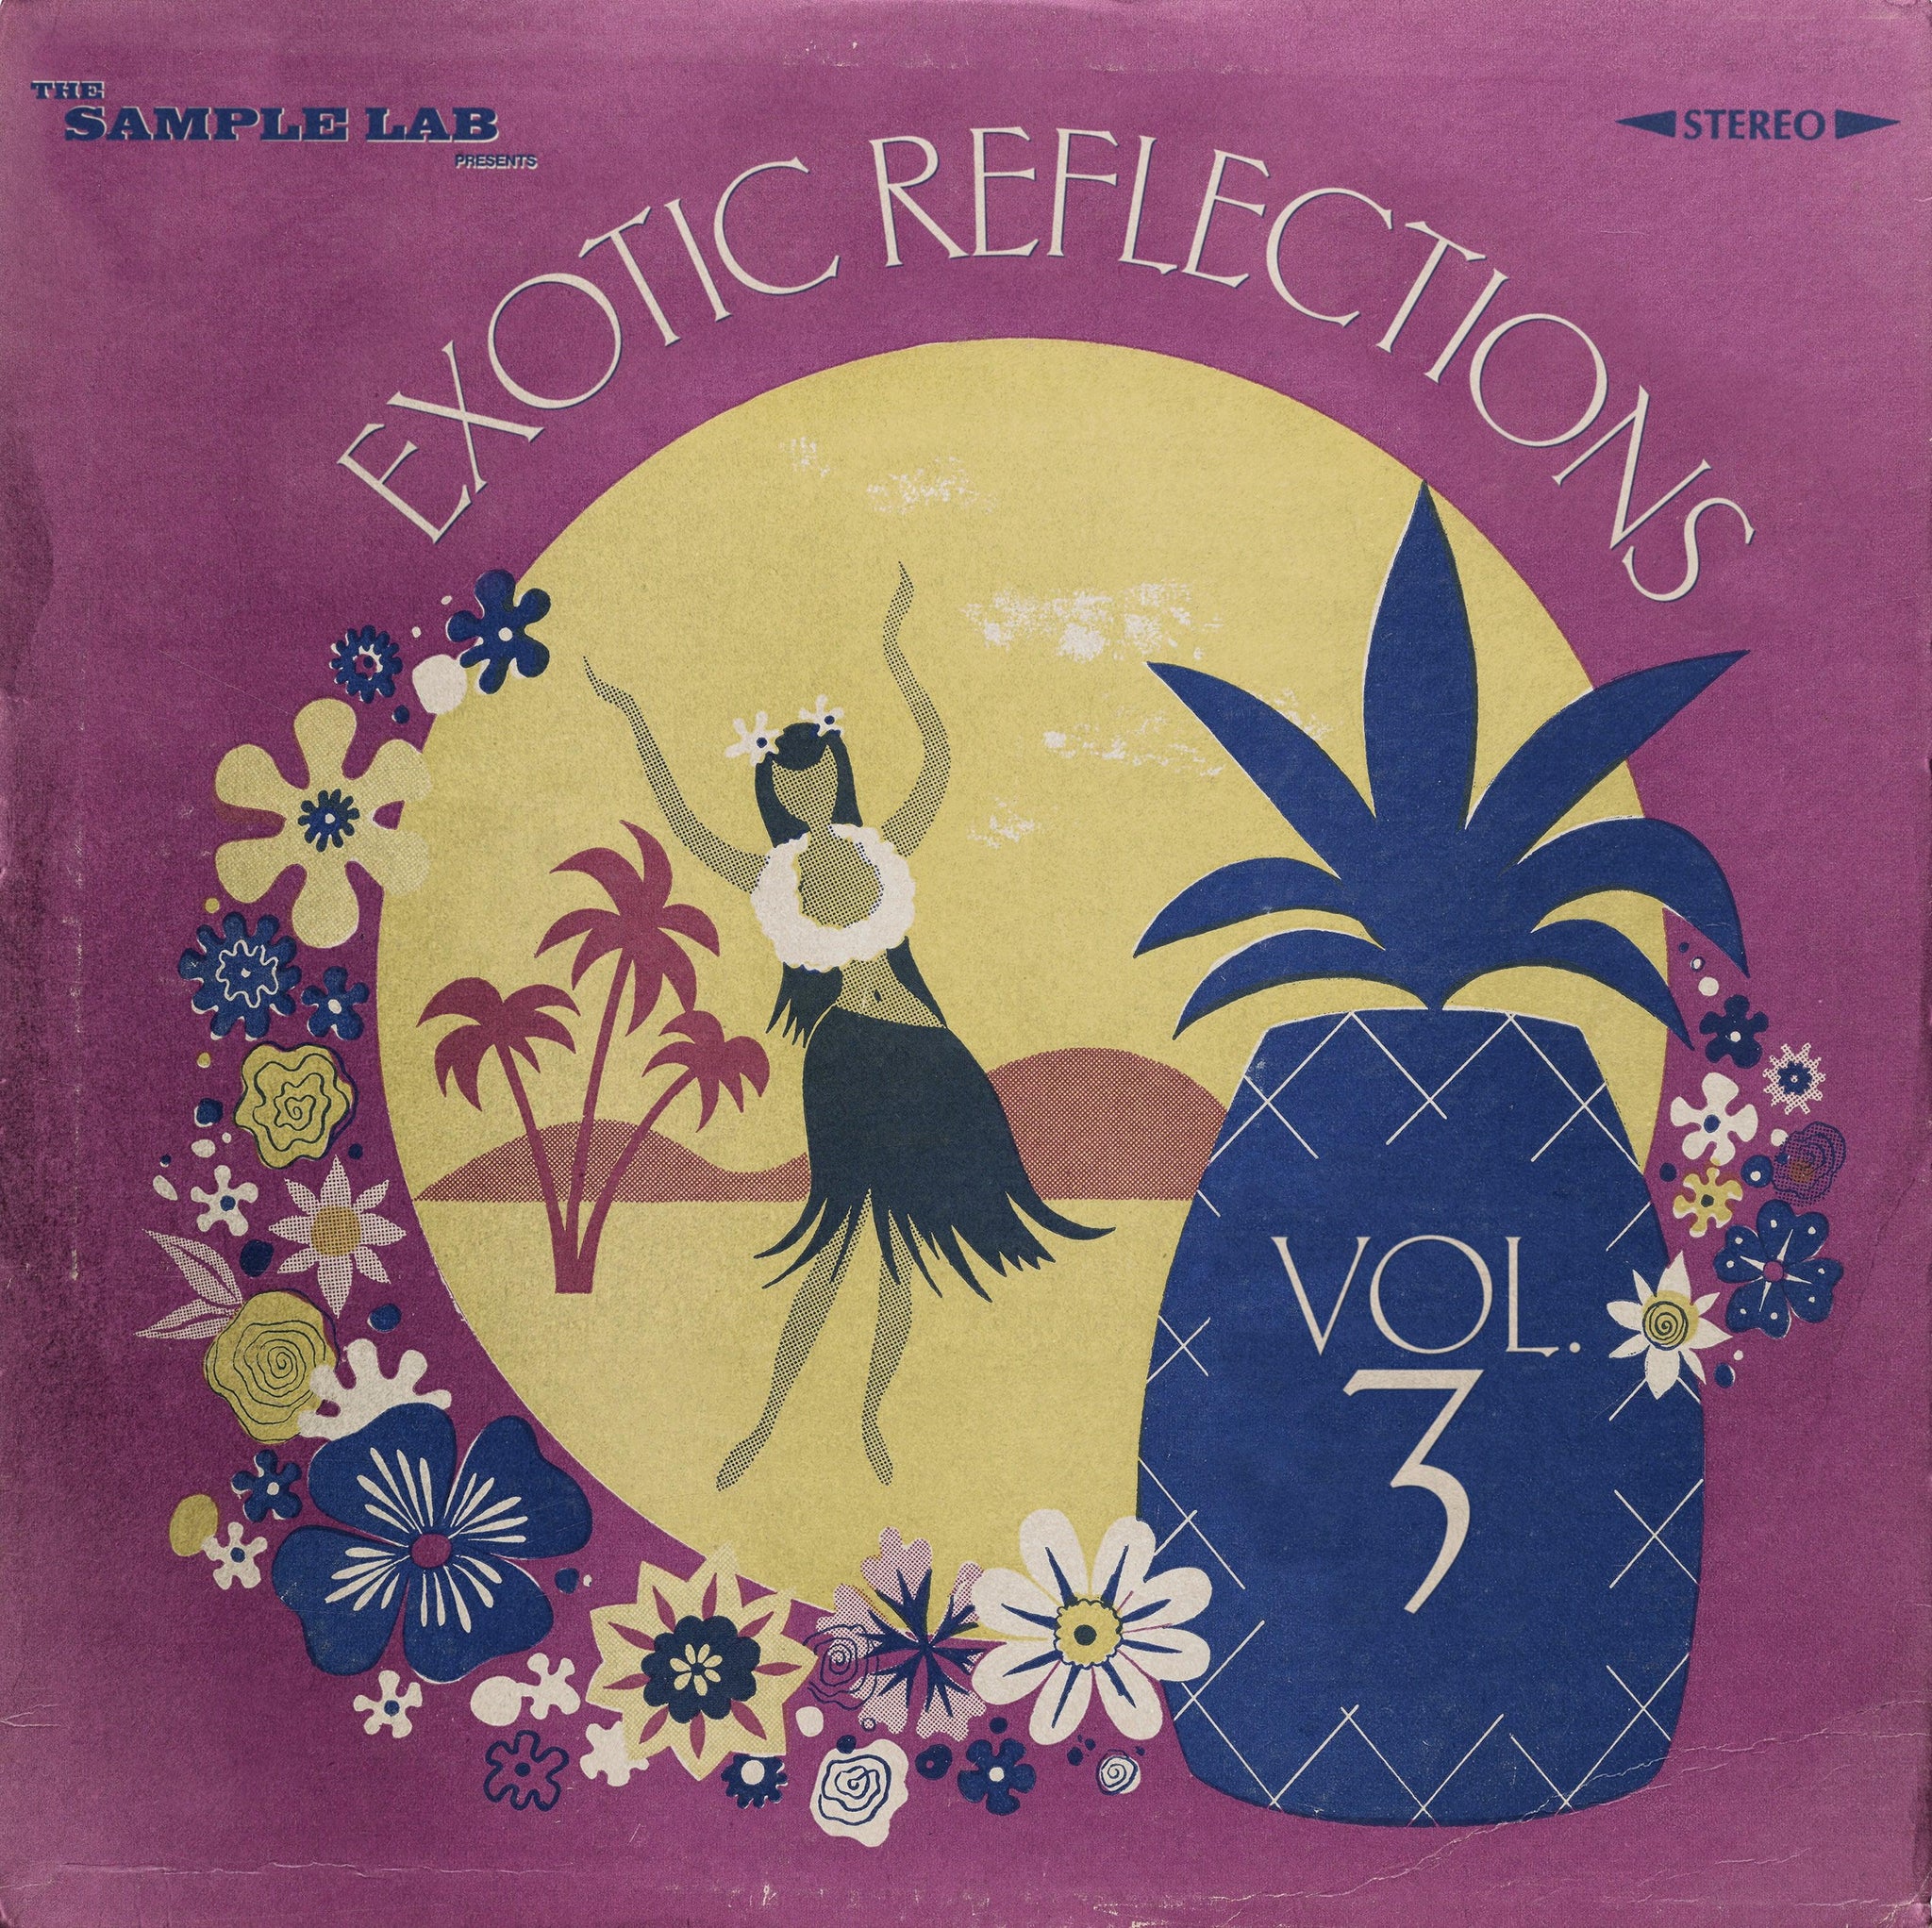 Exotic Reflections Vol. 3 - The Sample Lab